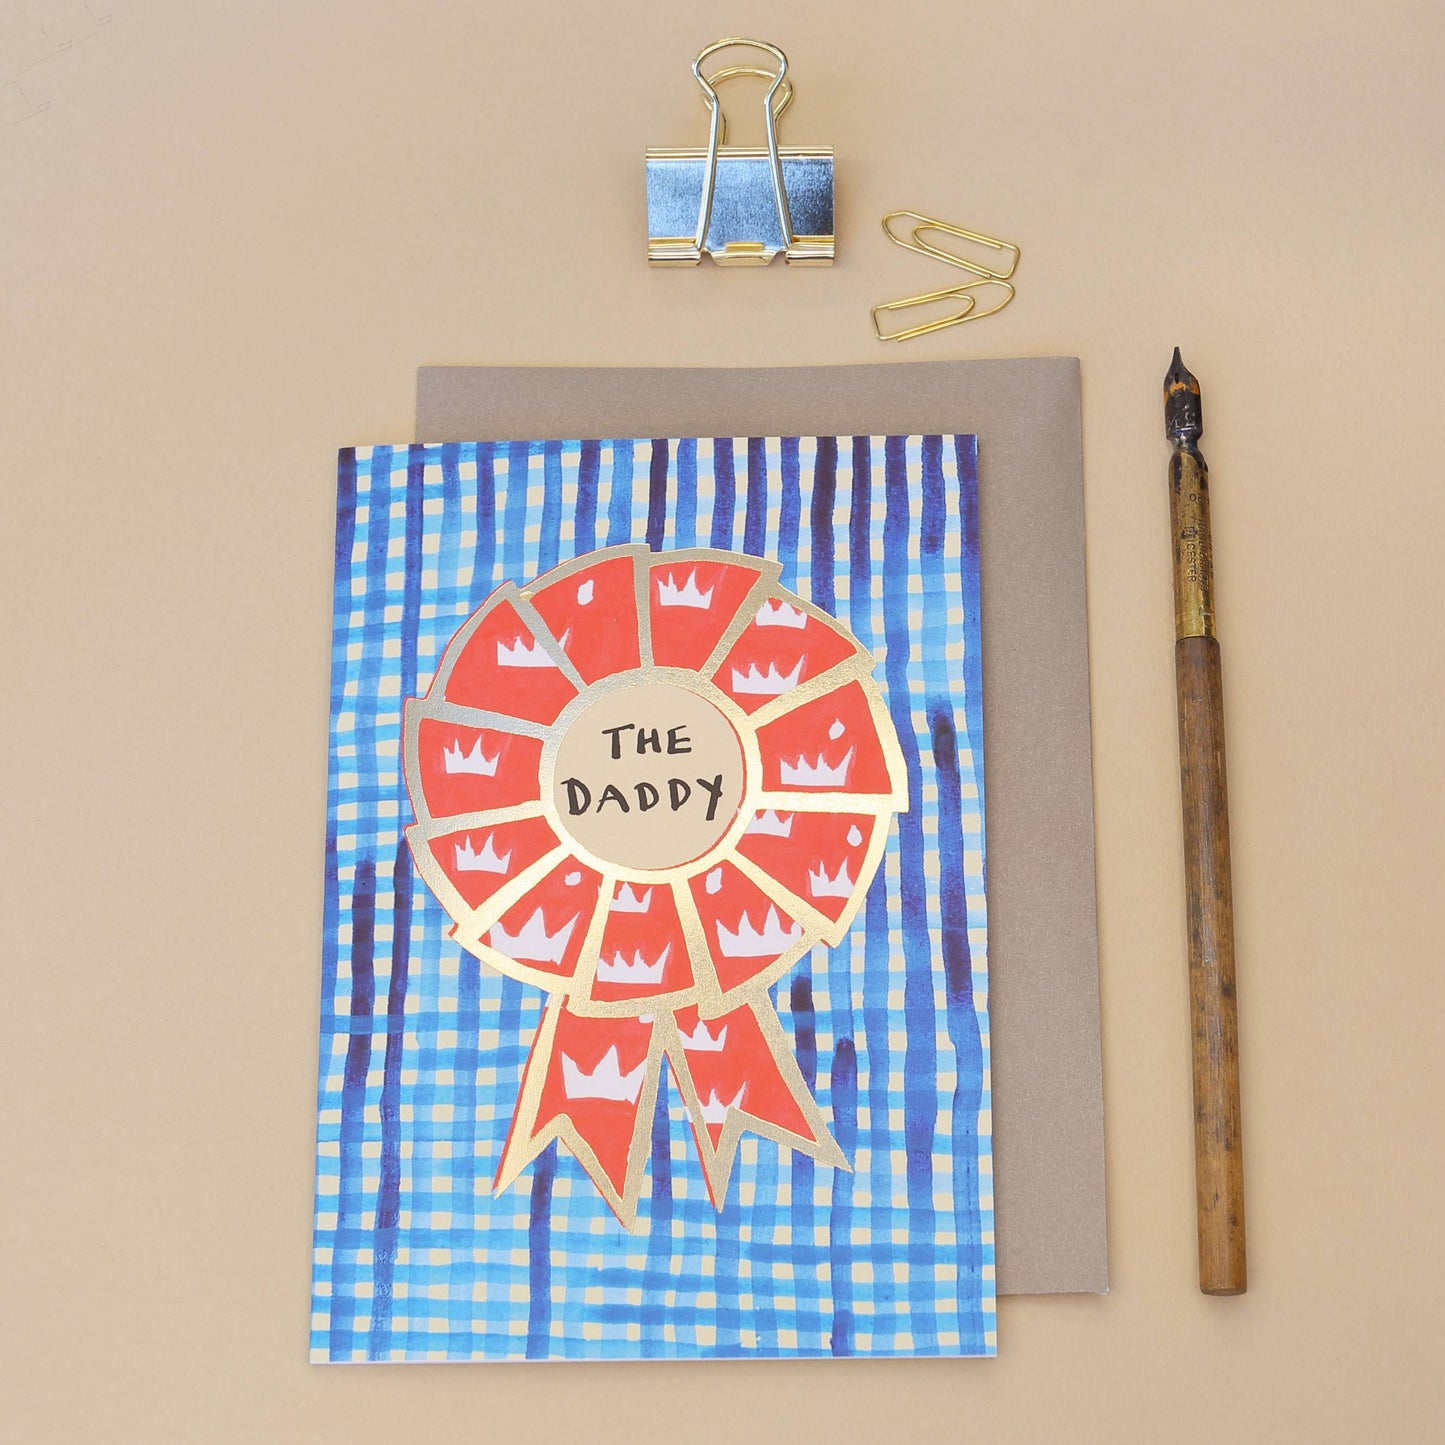 Poet and Painter - 'The Daddy' Rosette Greetings Card , FP3249